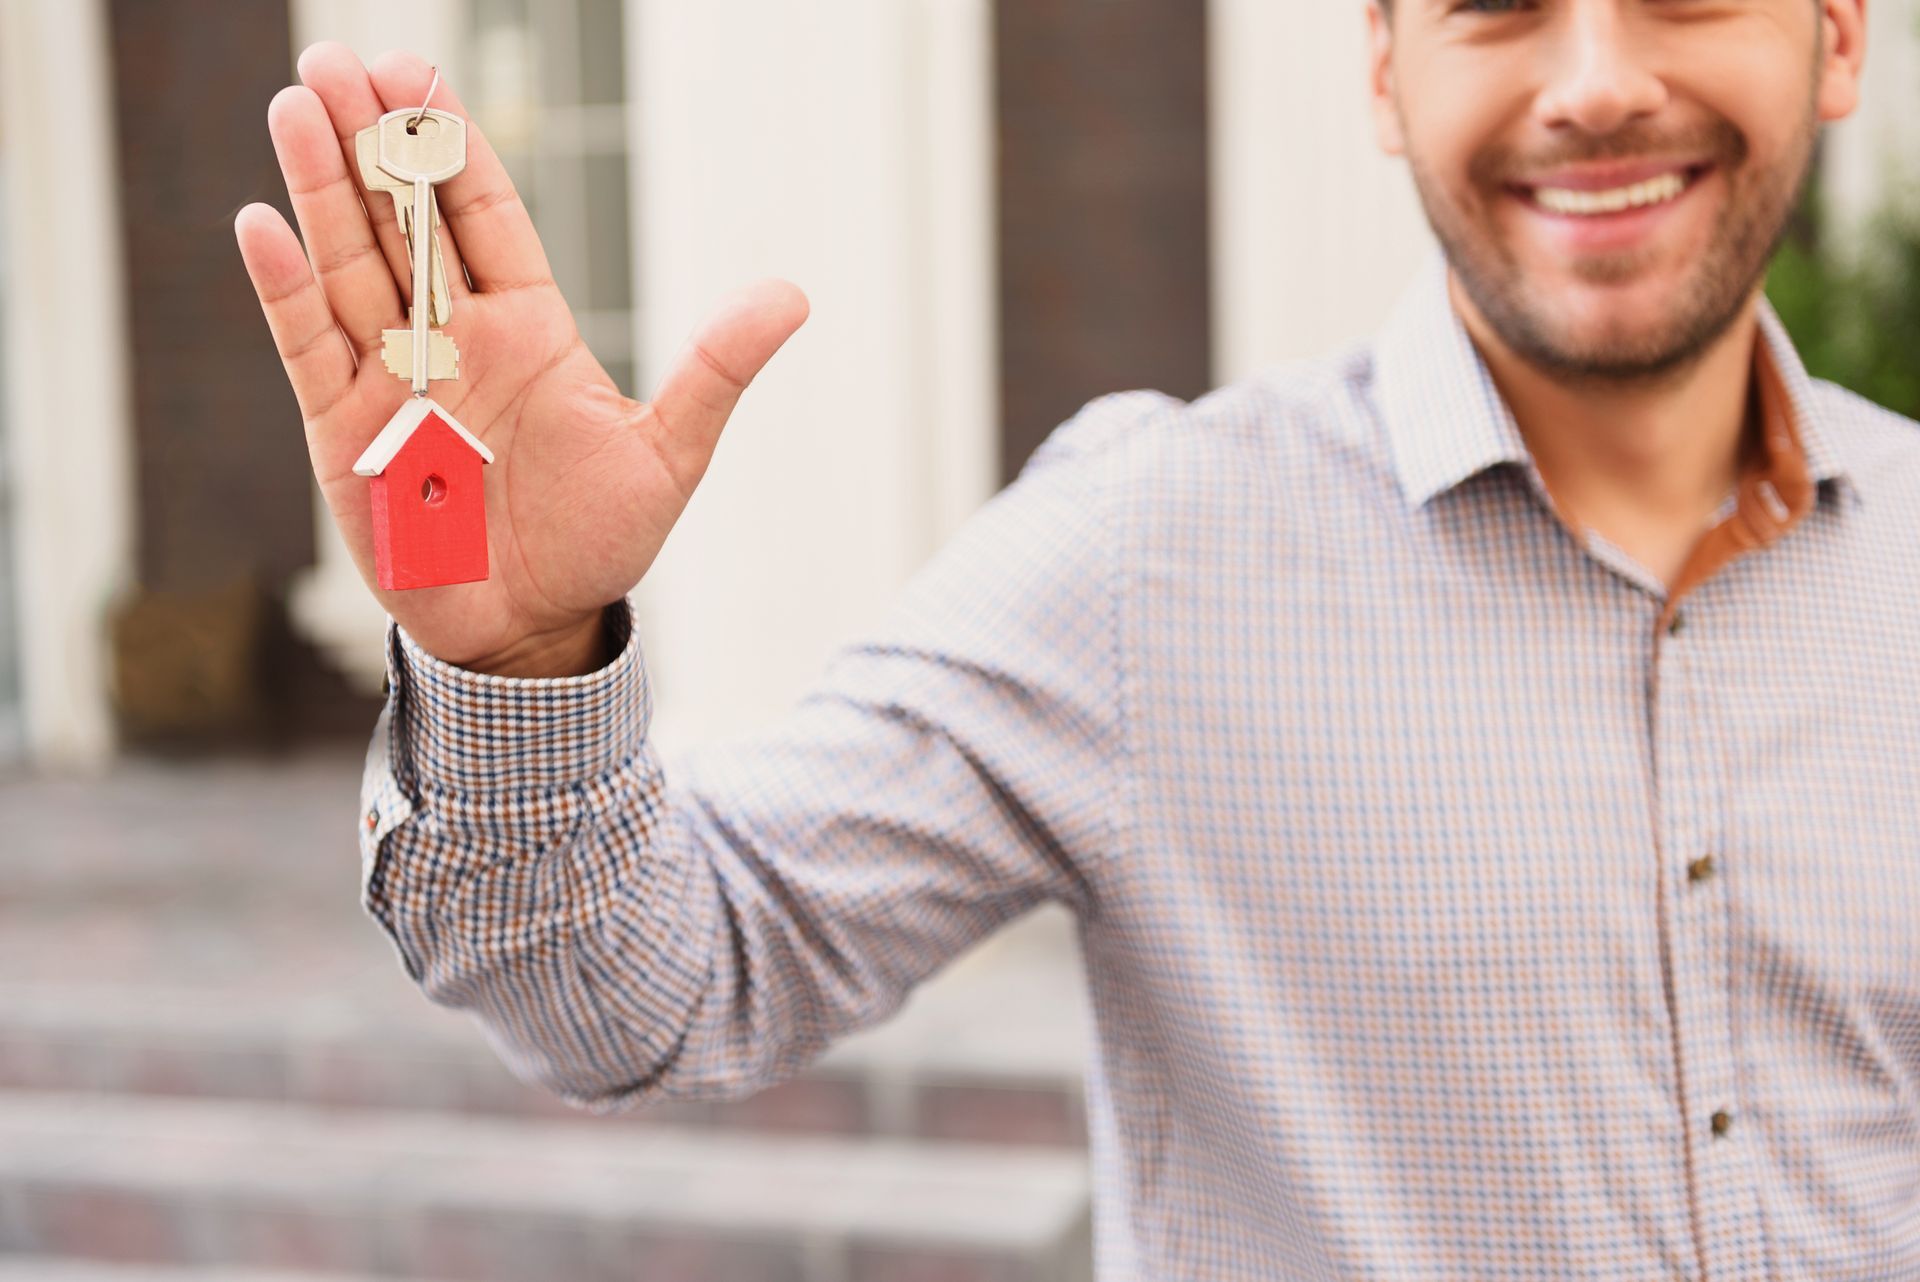 Your Key Partner Before Listing Your Home